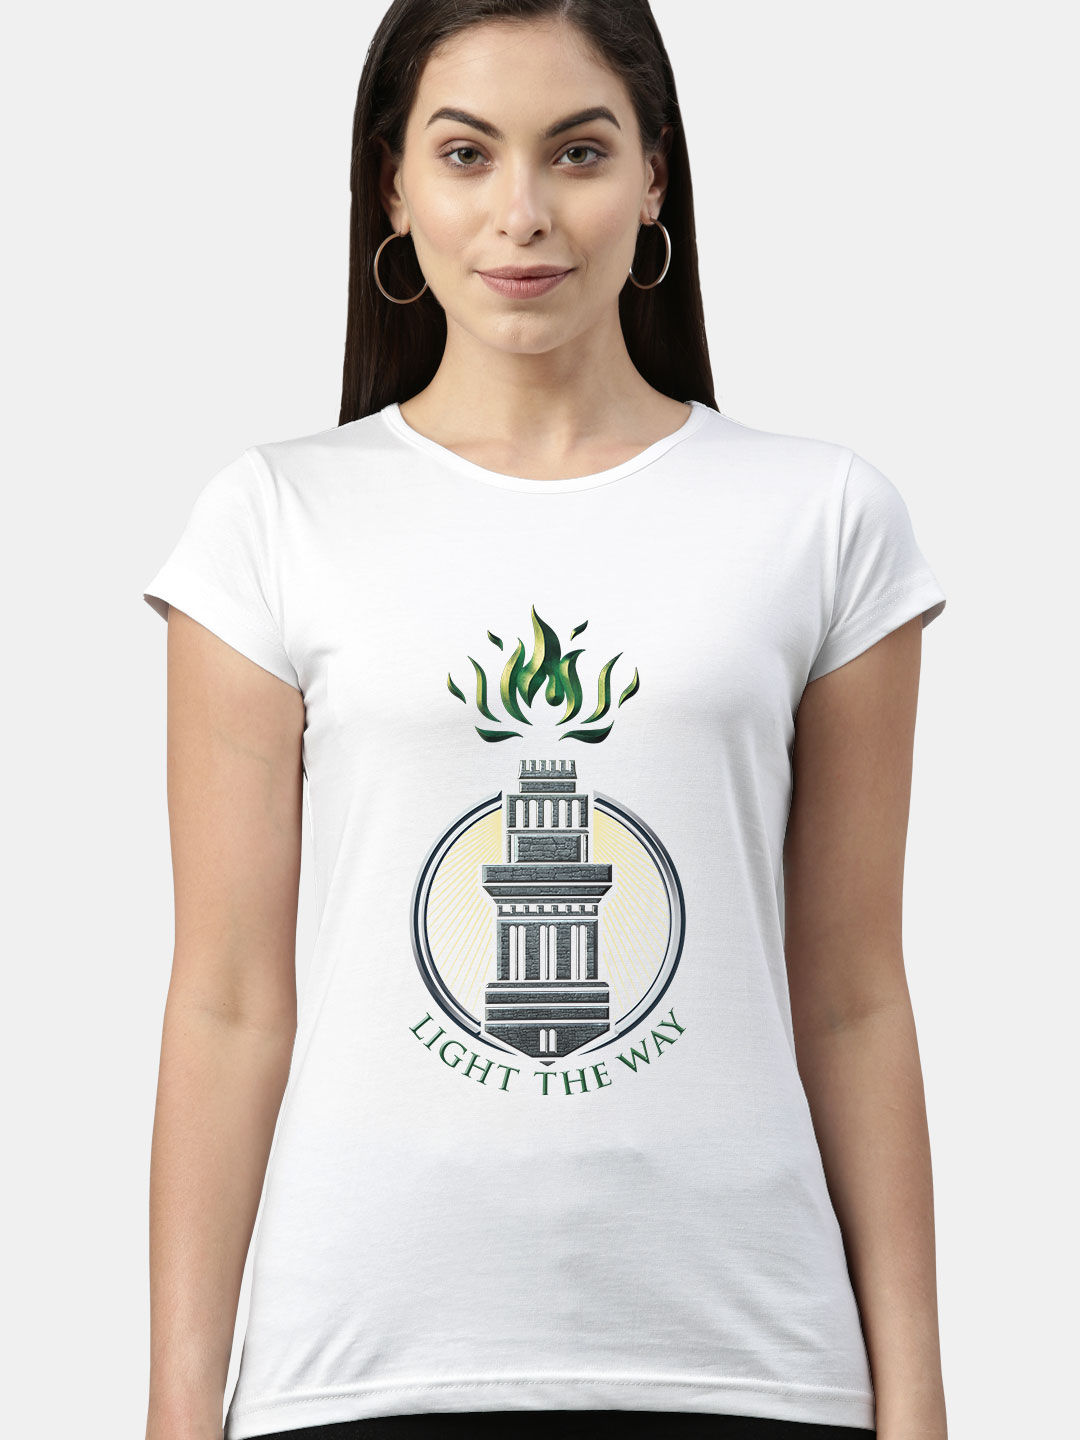 Buy Light the Way Front White - Female Designer T-Shirts T-Shirts Online